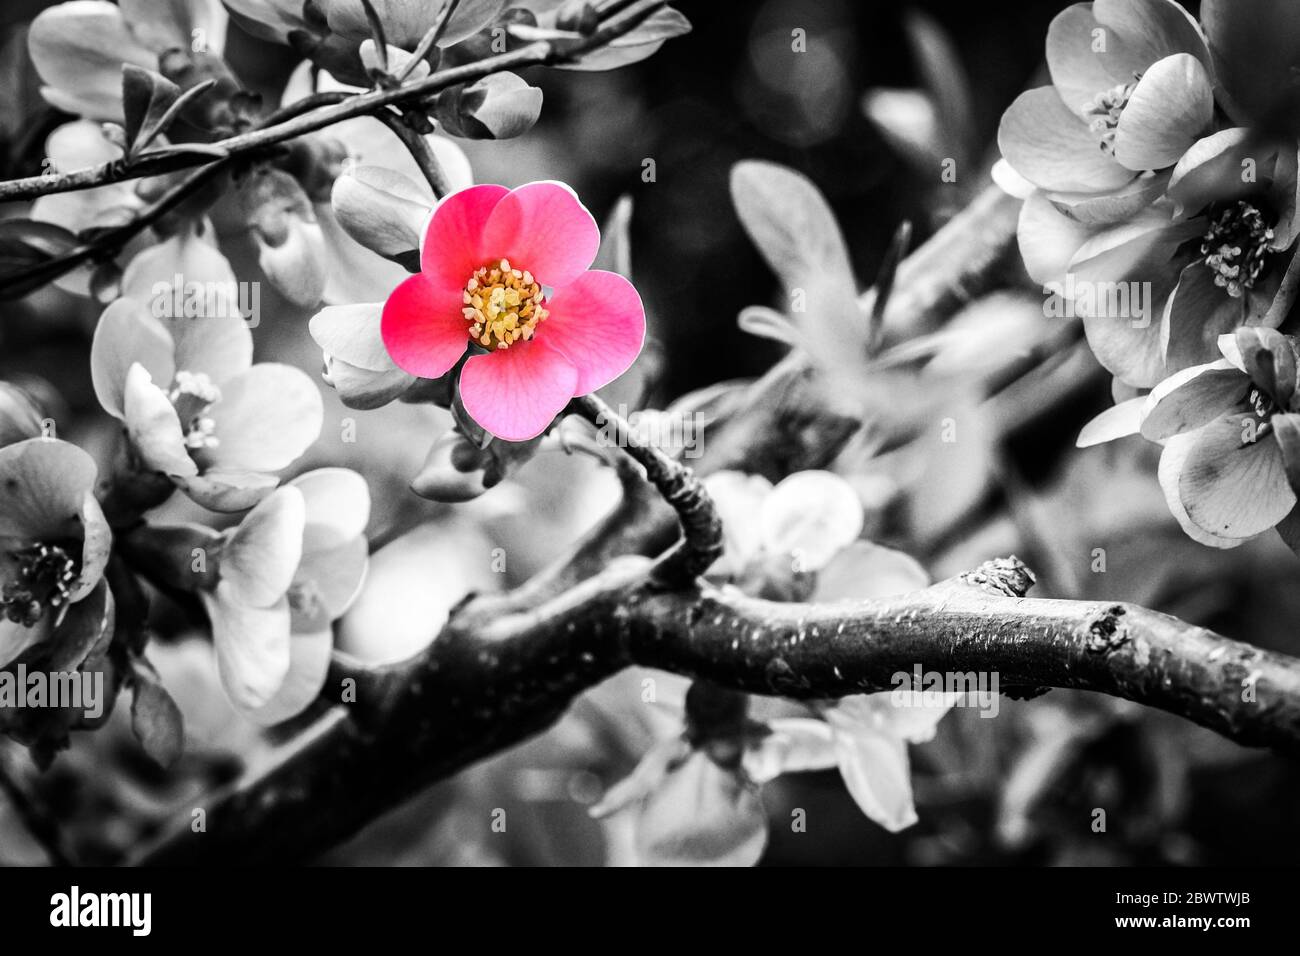 Branch with red flowers of Japanese Quince (Chaenomeles japonica) blooming in april, black and white image with selected colour Stock Photo